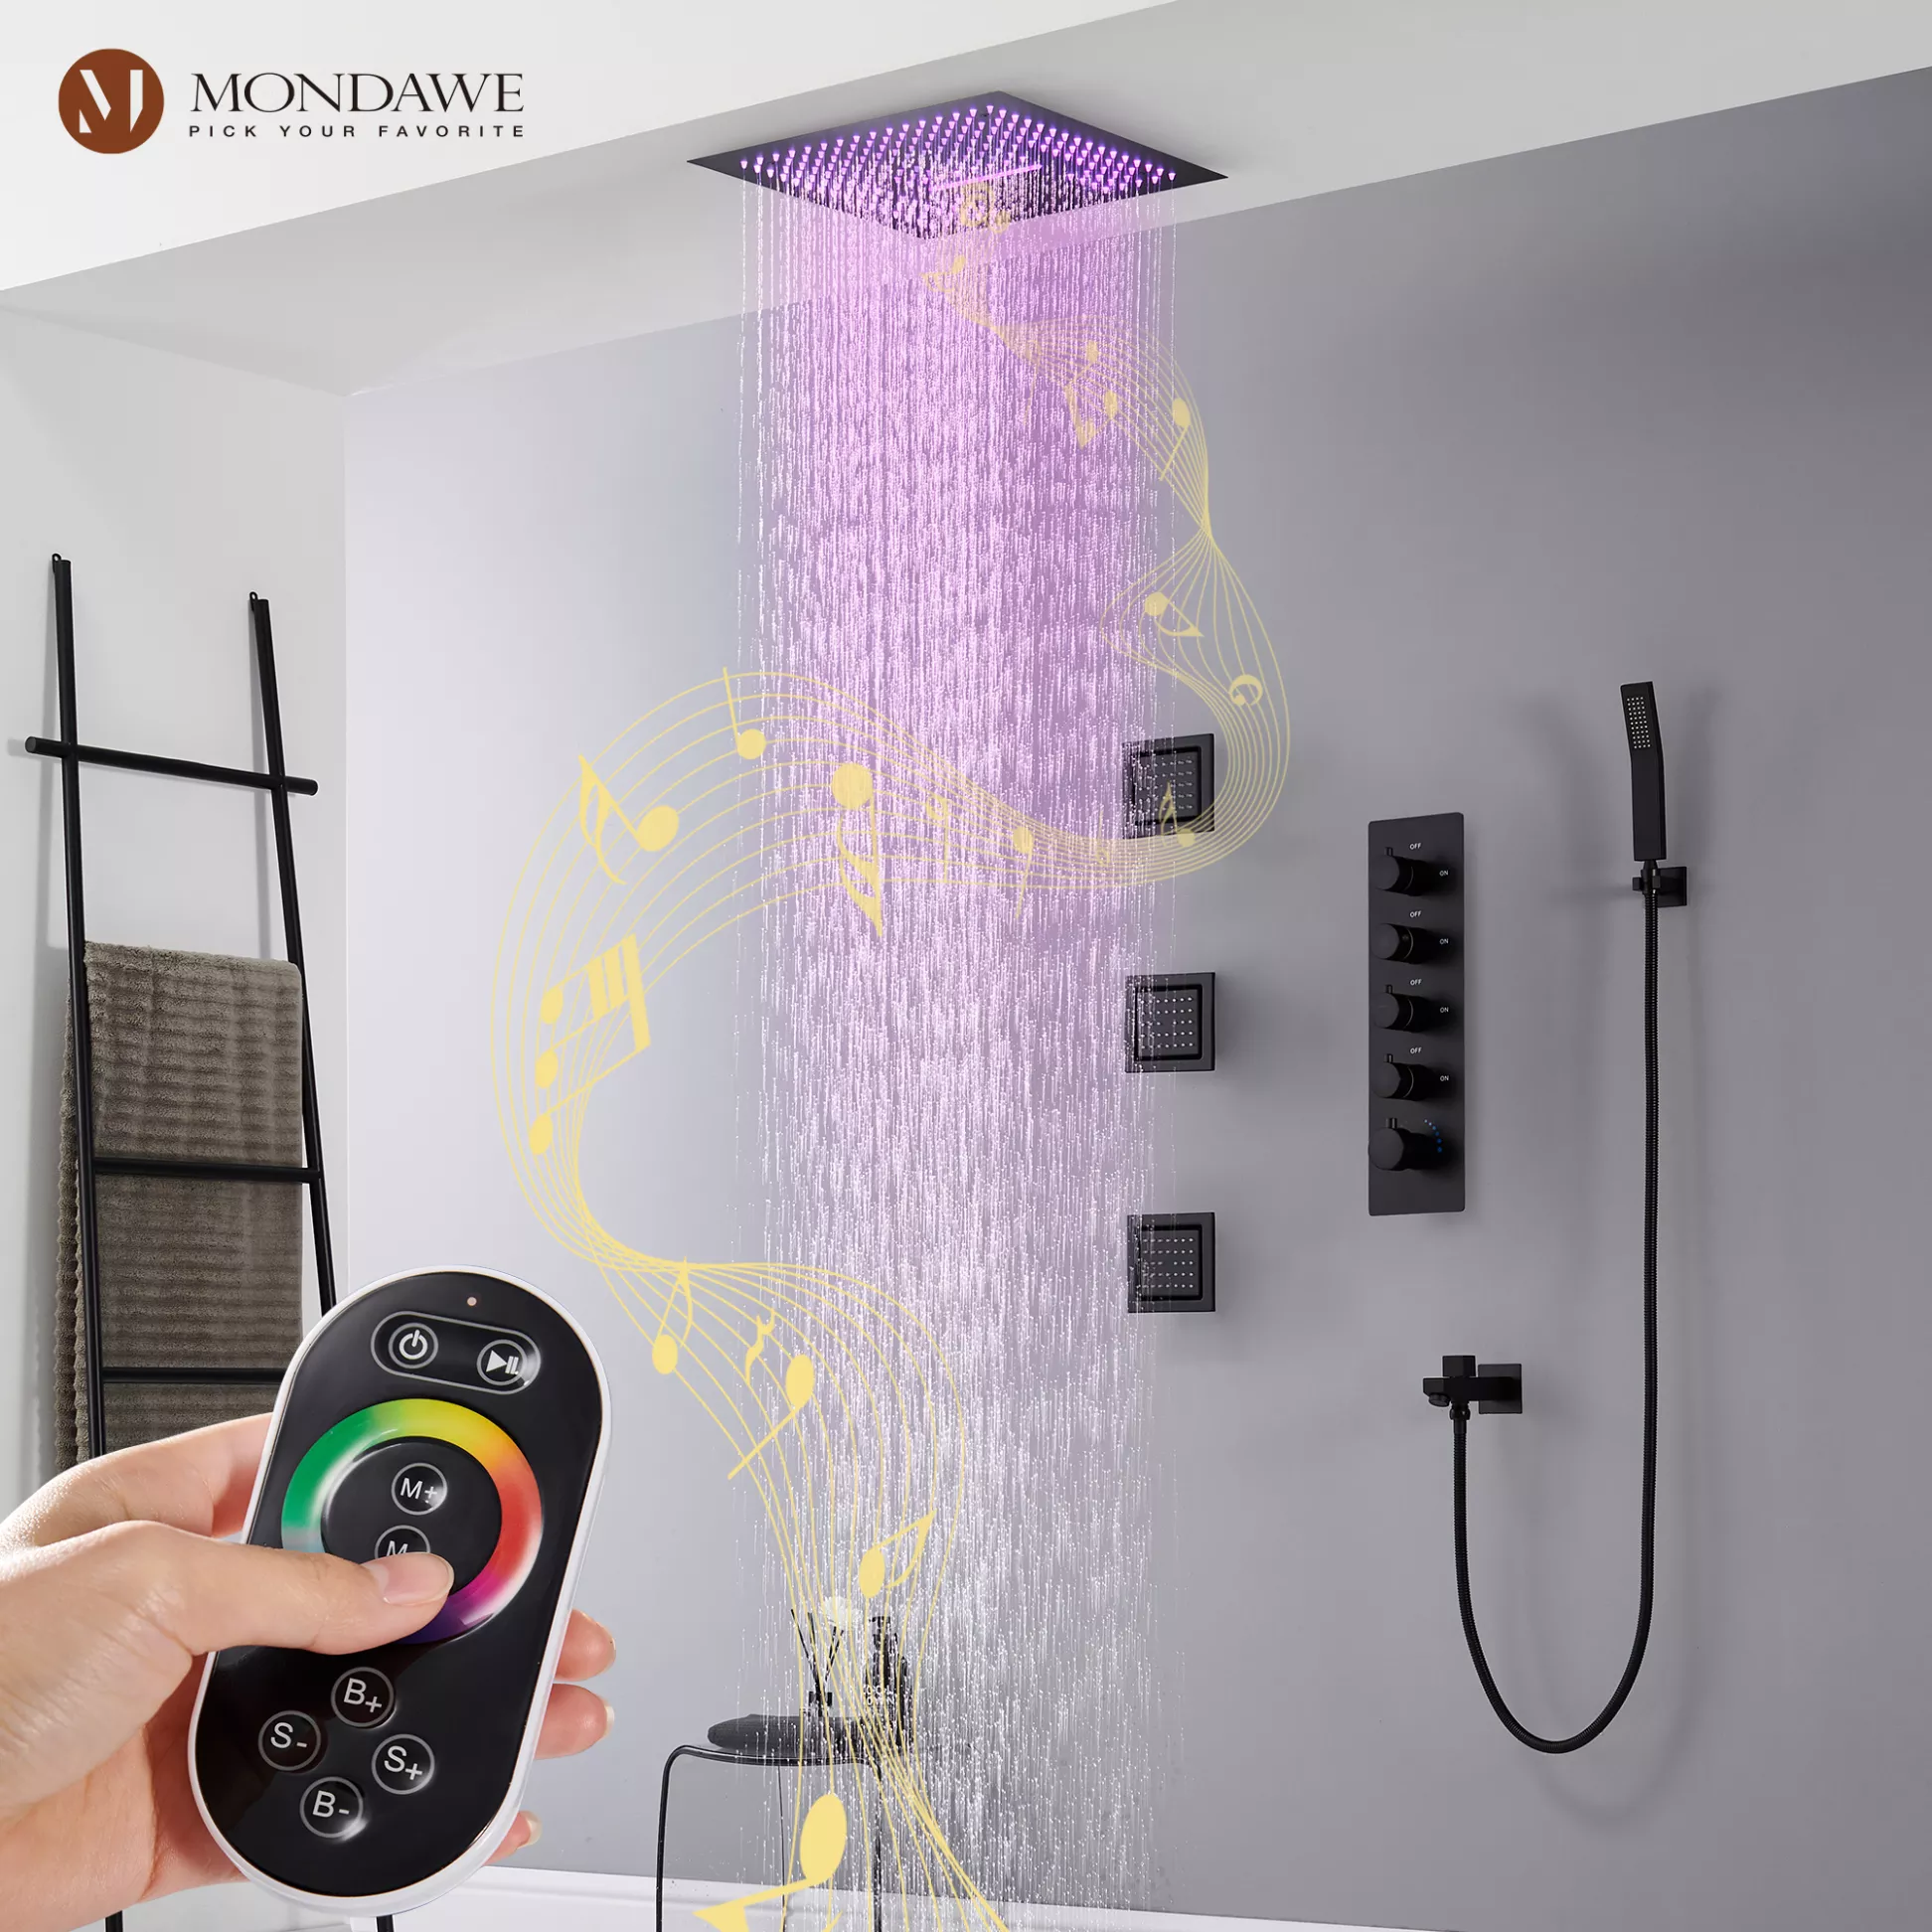 SHOWER SYSTEM WITH LED AND MUSIC PLAYER